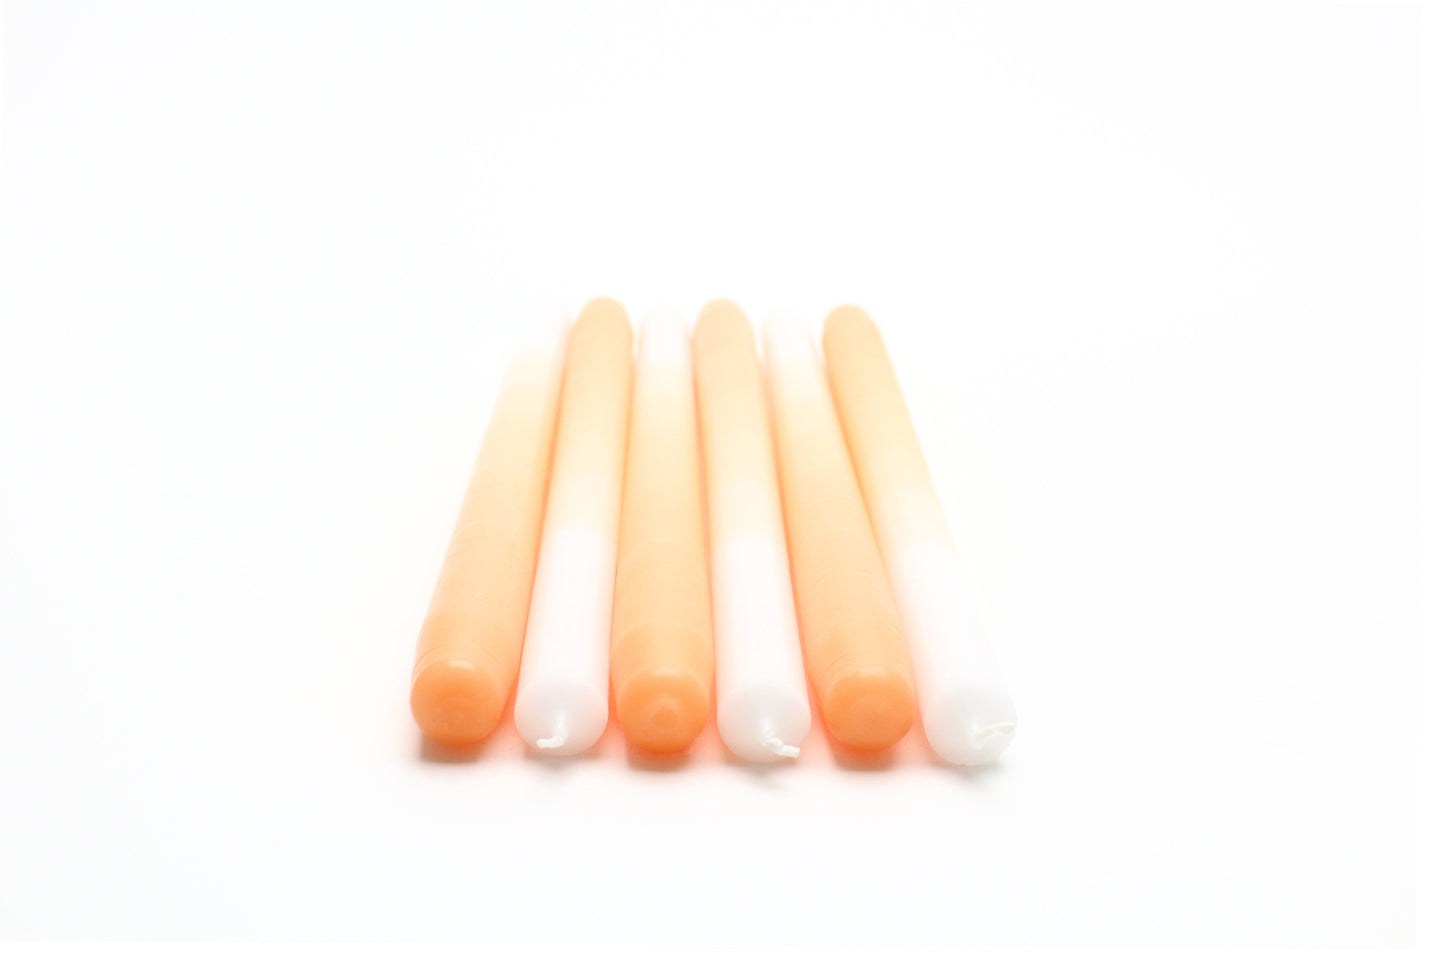 GRADIENT CANDLES | DUTCH ORANGE (set of 6, in a gift box)